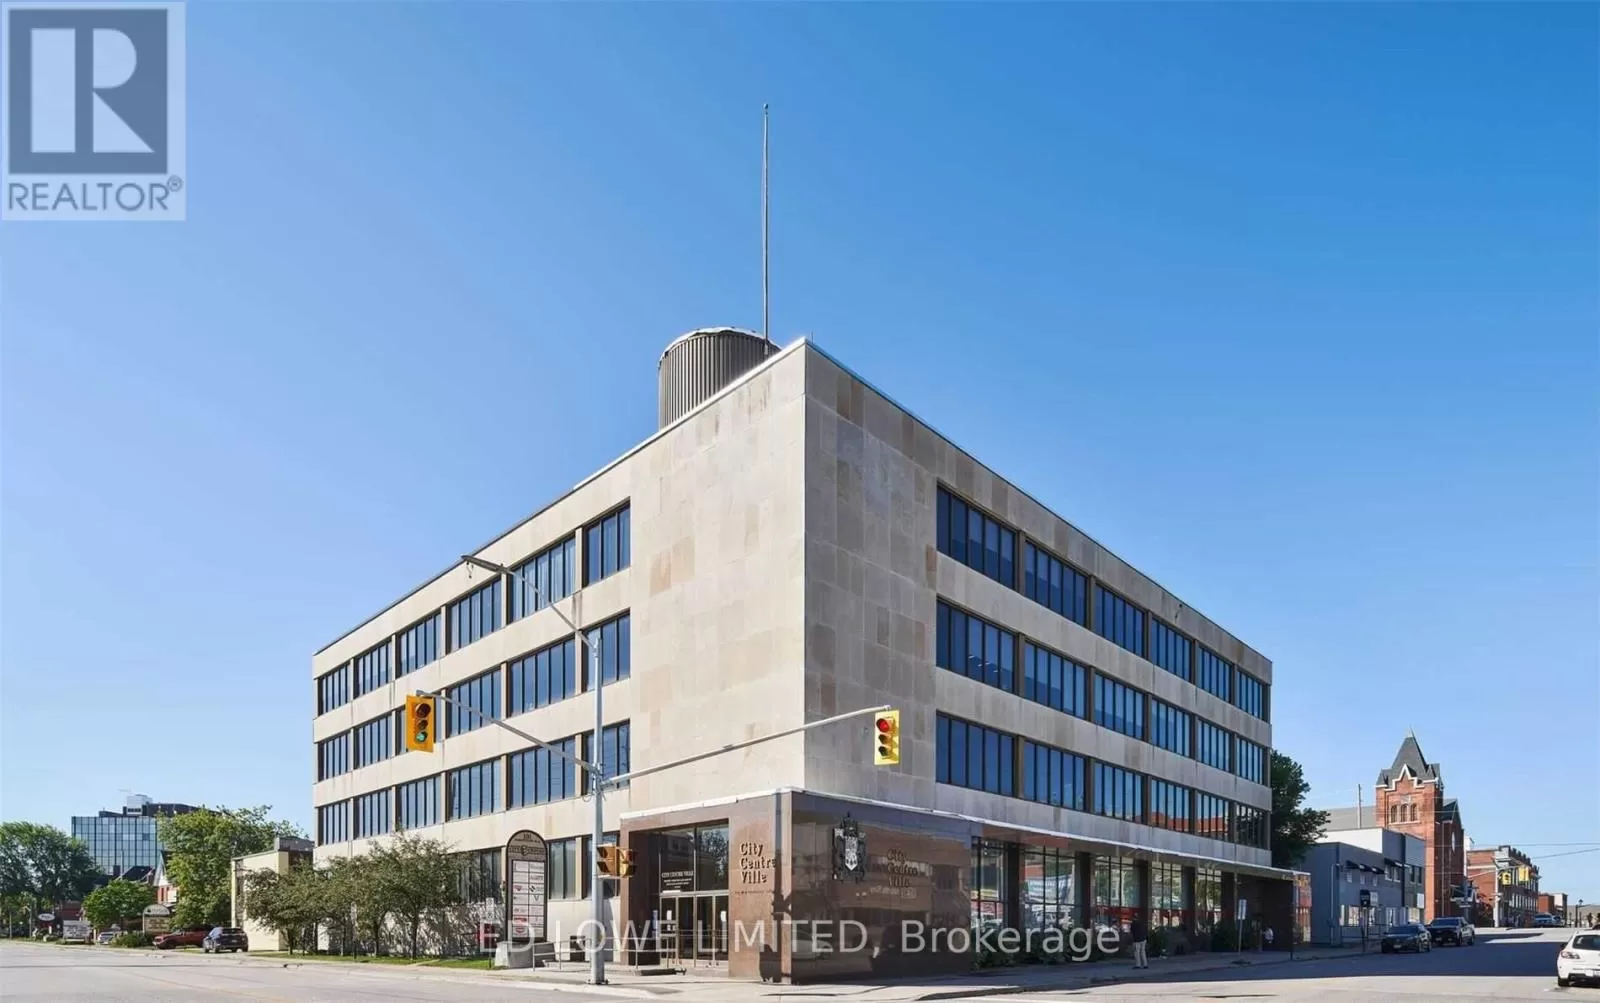 Offices for rent: #238 -101 Worthington St E, North Bay, Ontario P1B 1G5